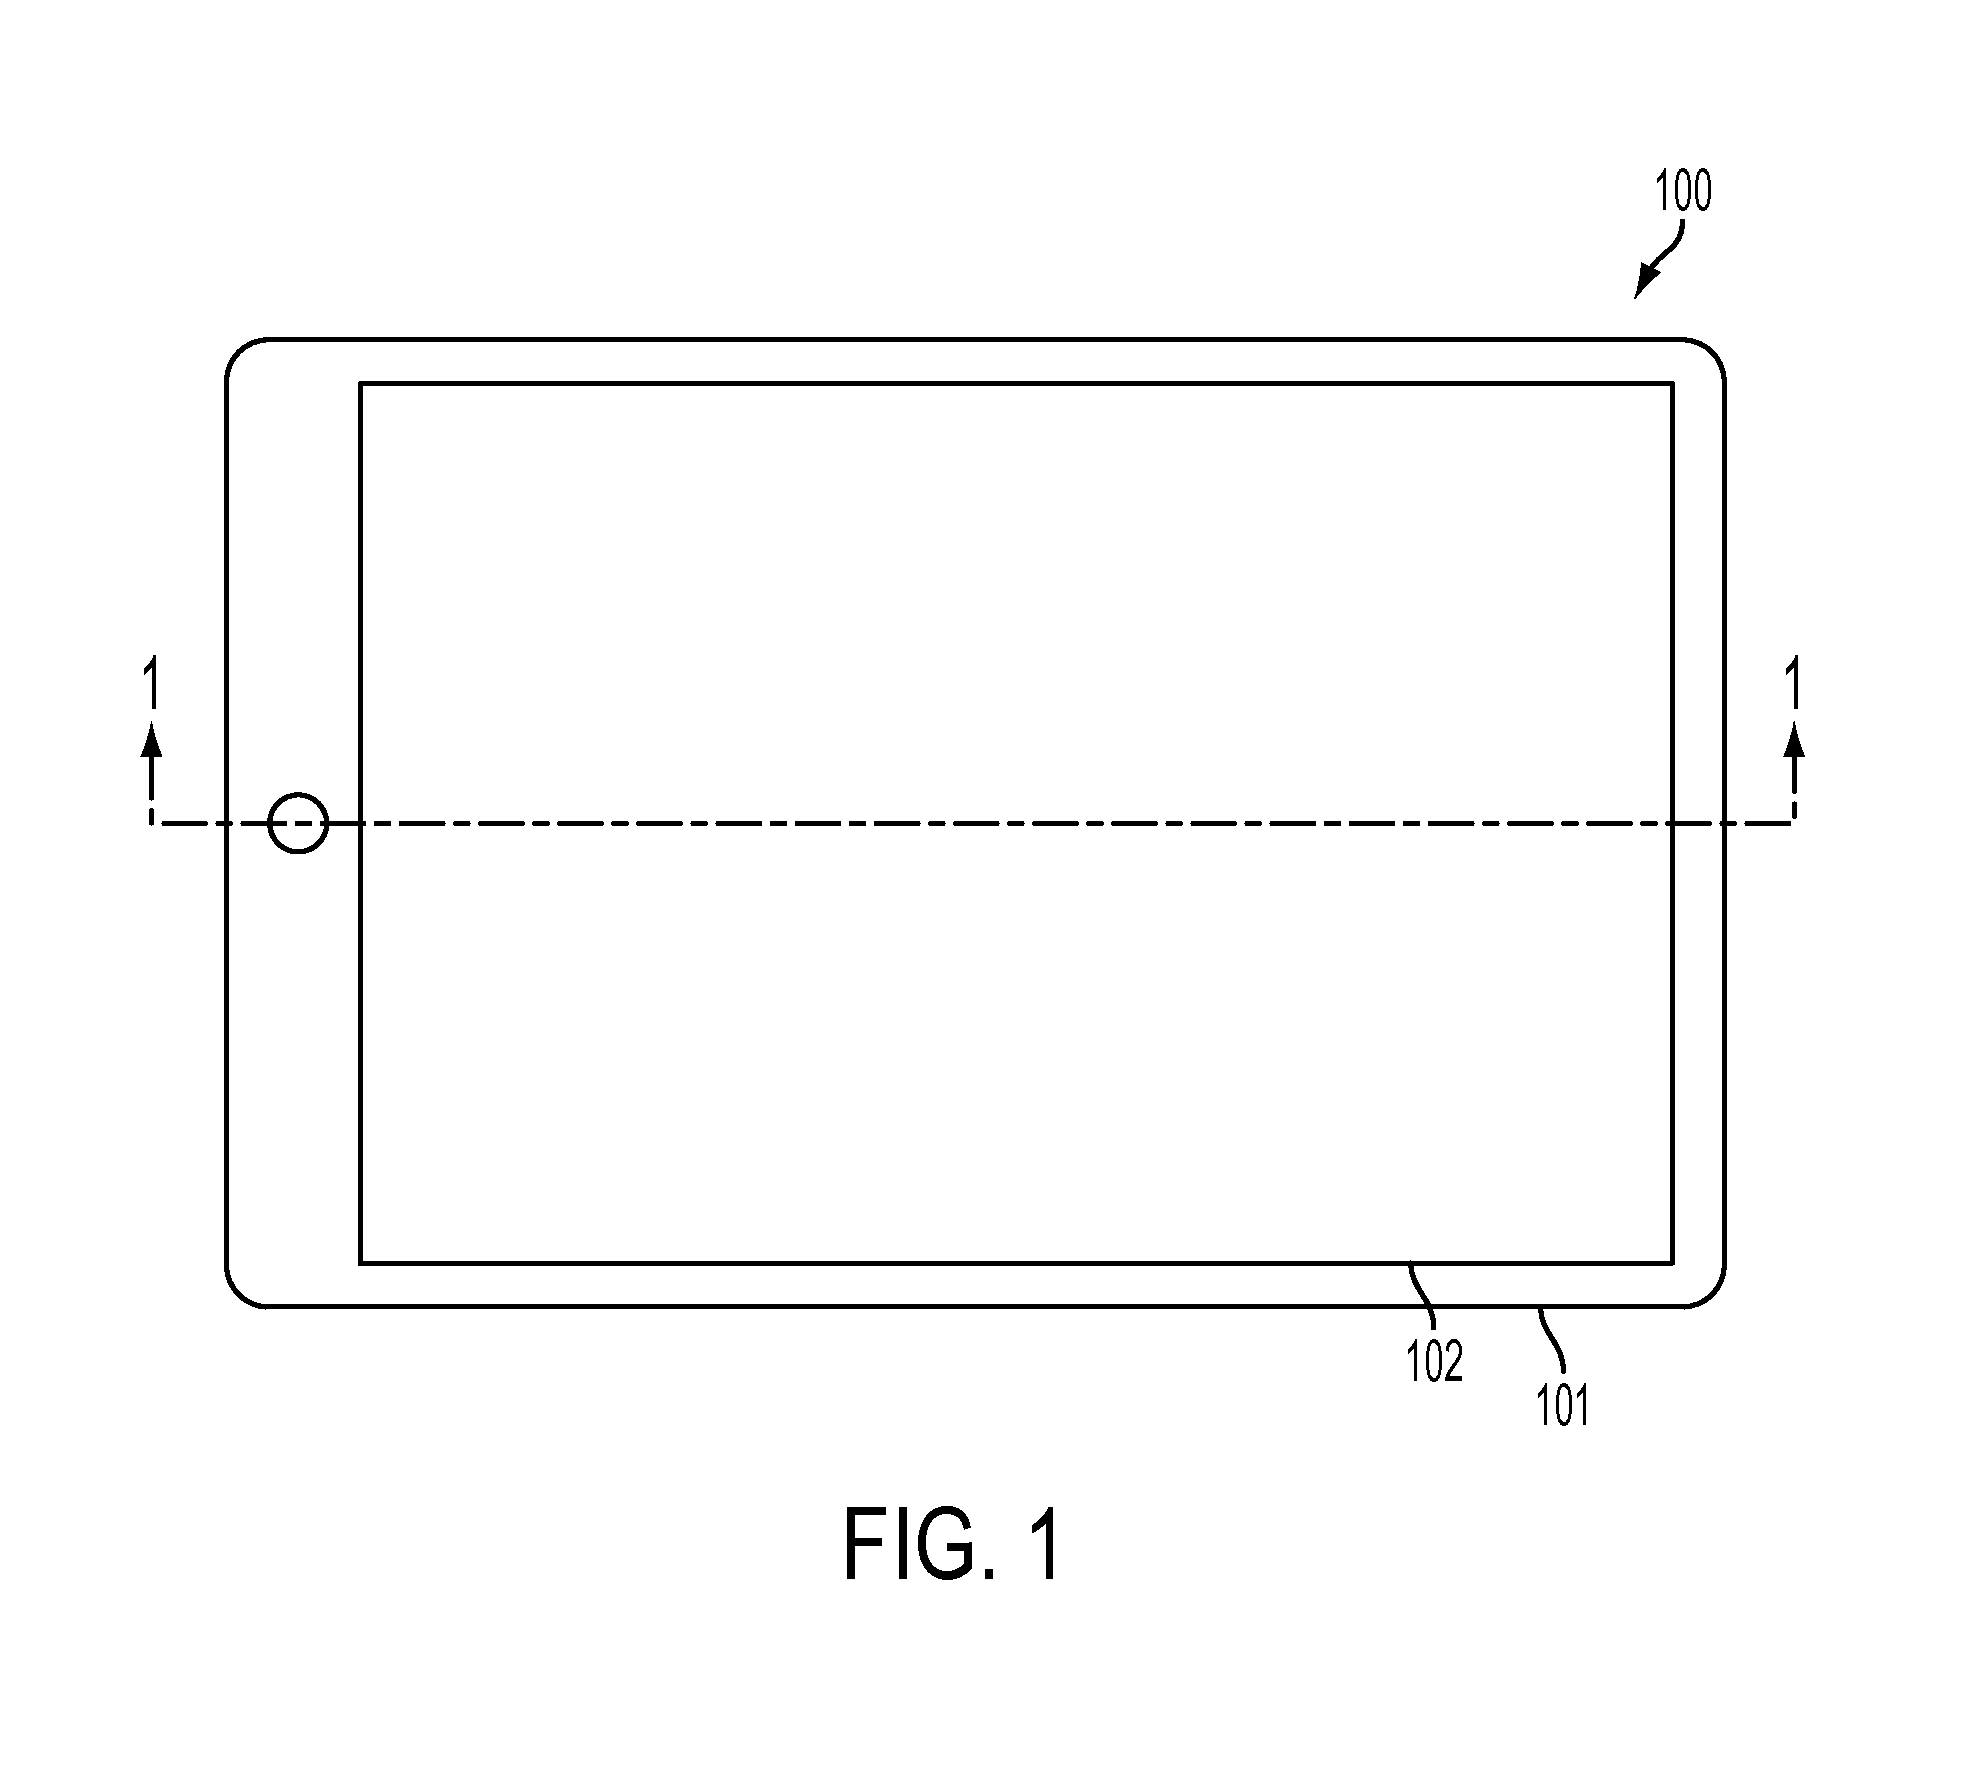 Spatially interactive computing device